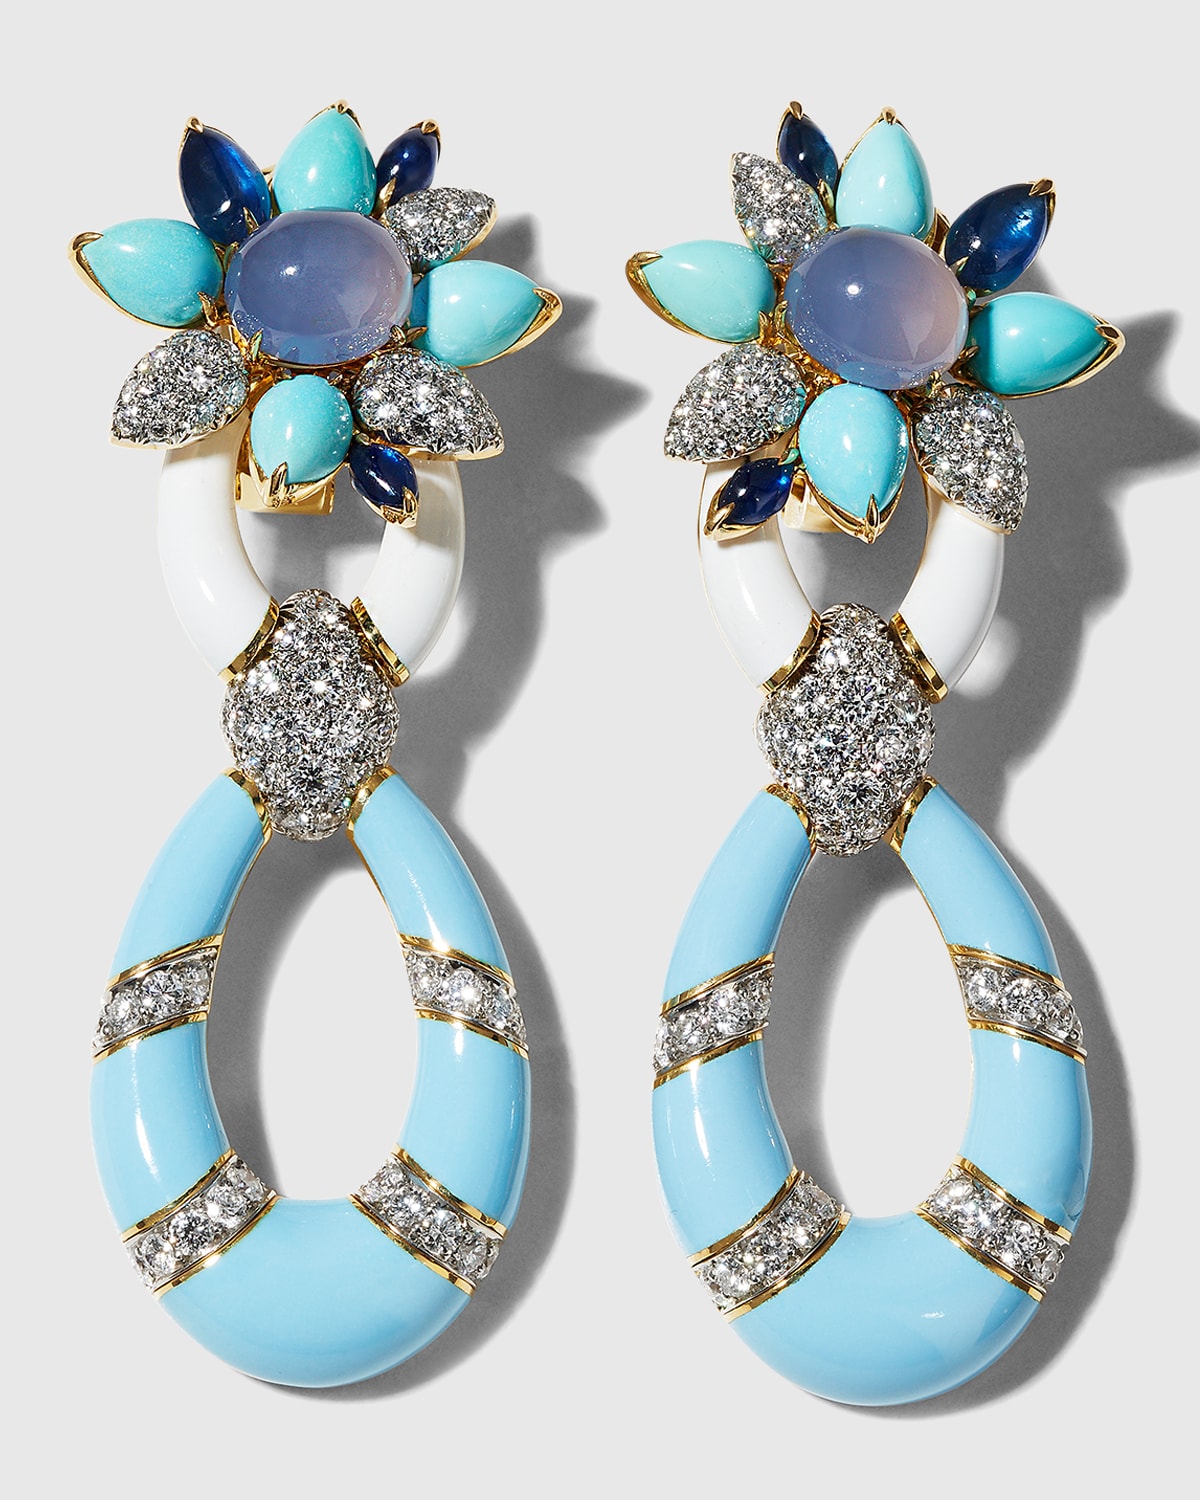 David Webb Yellow Gold and Platinum Asheville Earrings with Blue Chalcedony, Turquoise and Sapphires